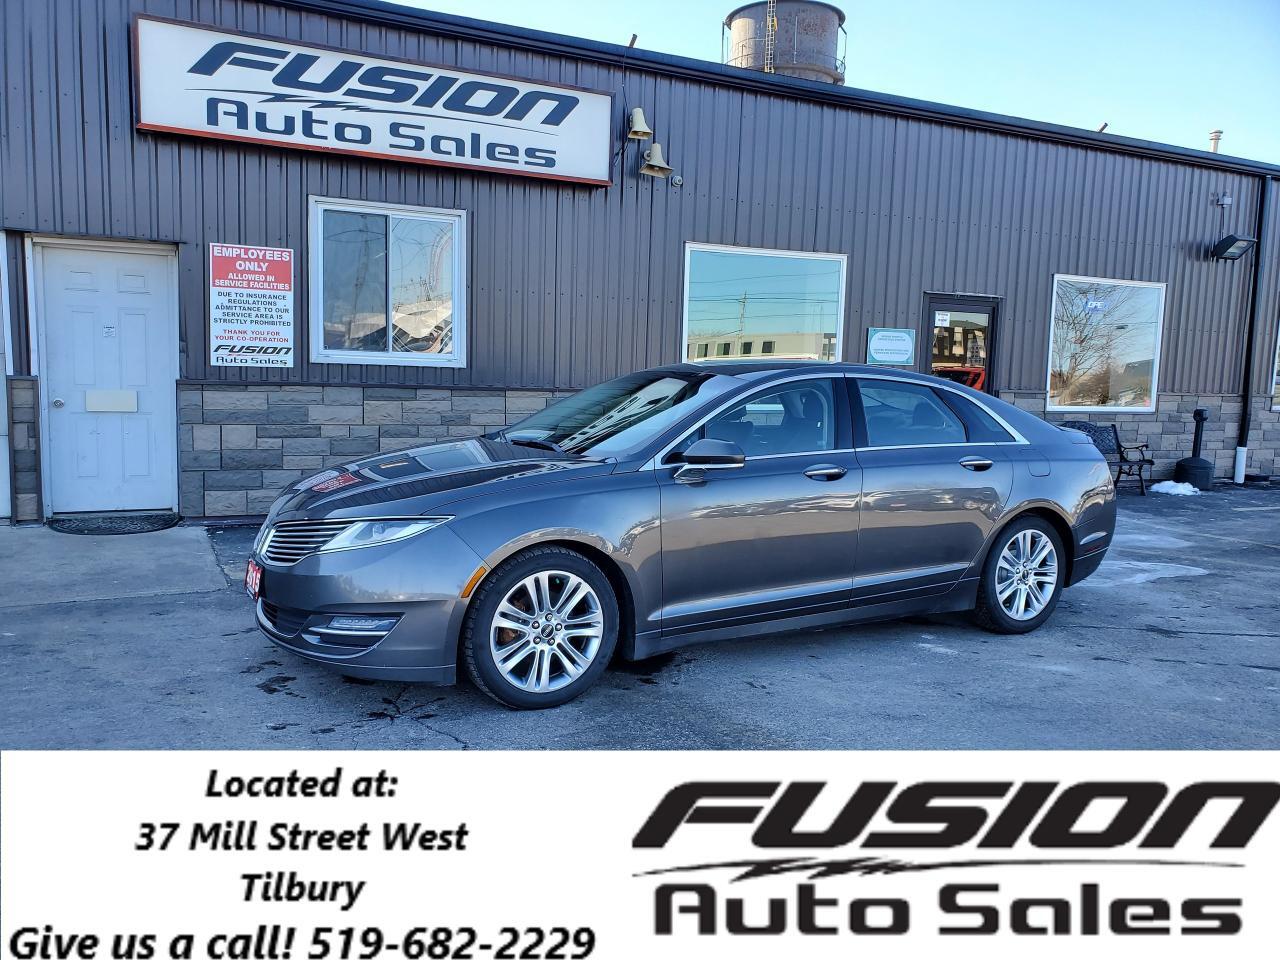 2013 Lincoln MKZ V6 AWD-NO HST TO A MAX OF $2000 LTD TIME ONLY